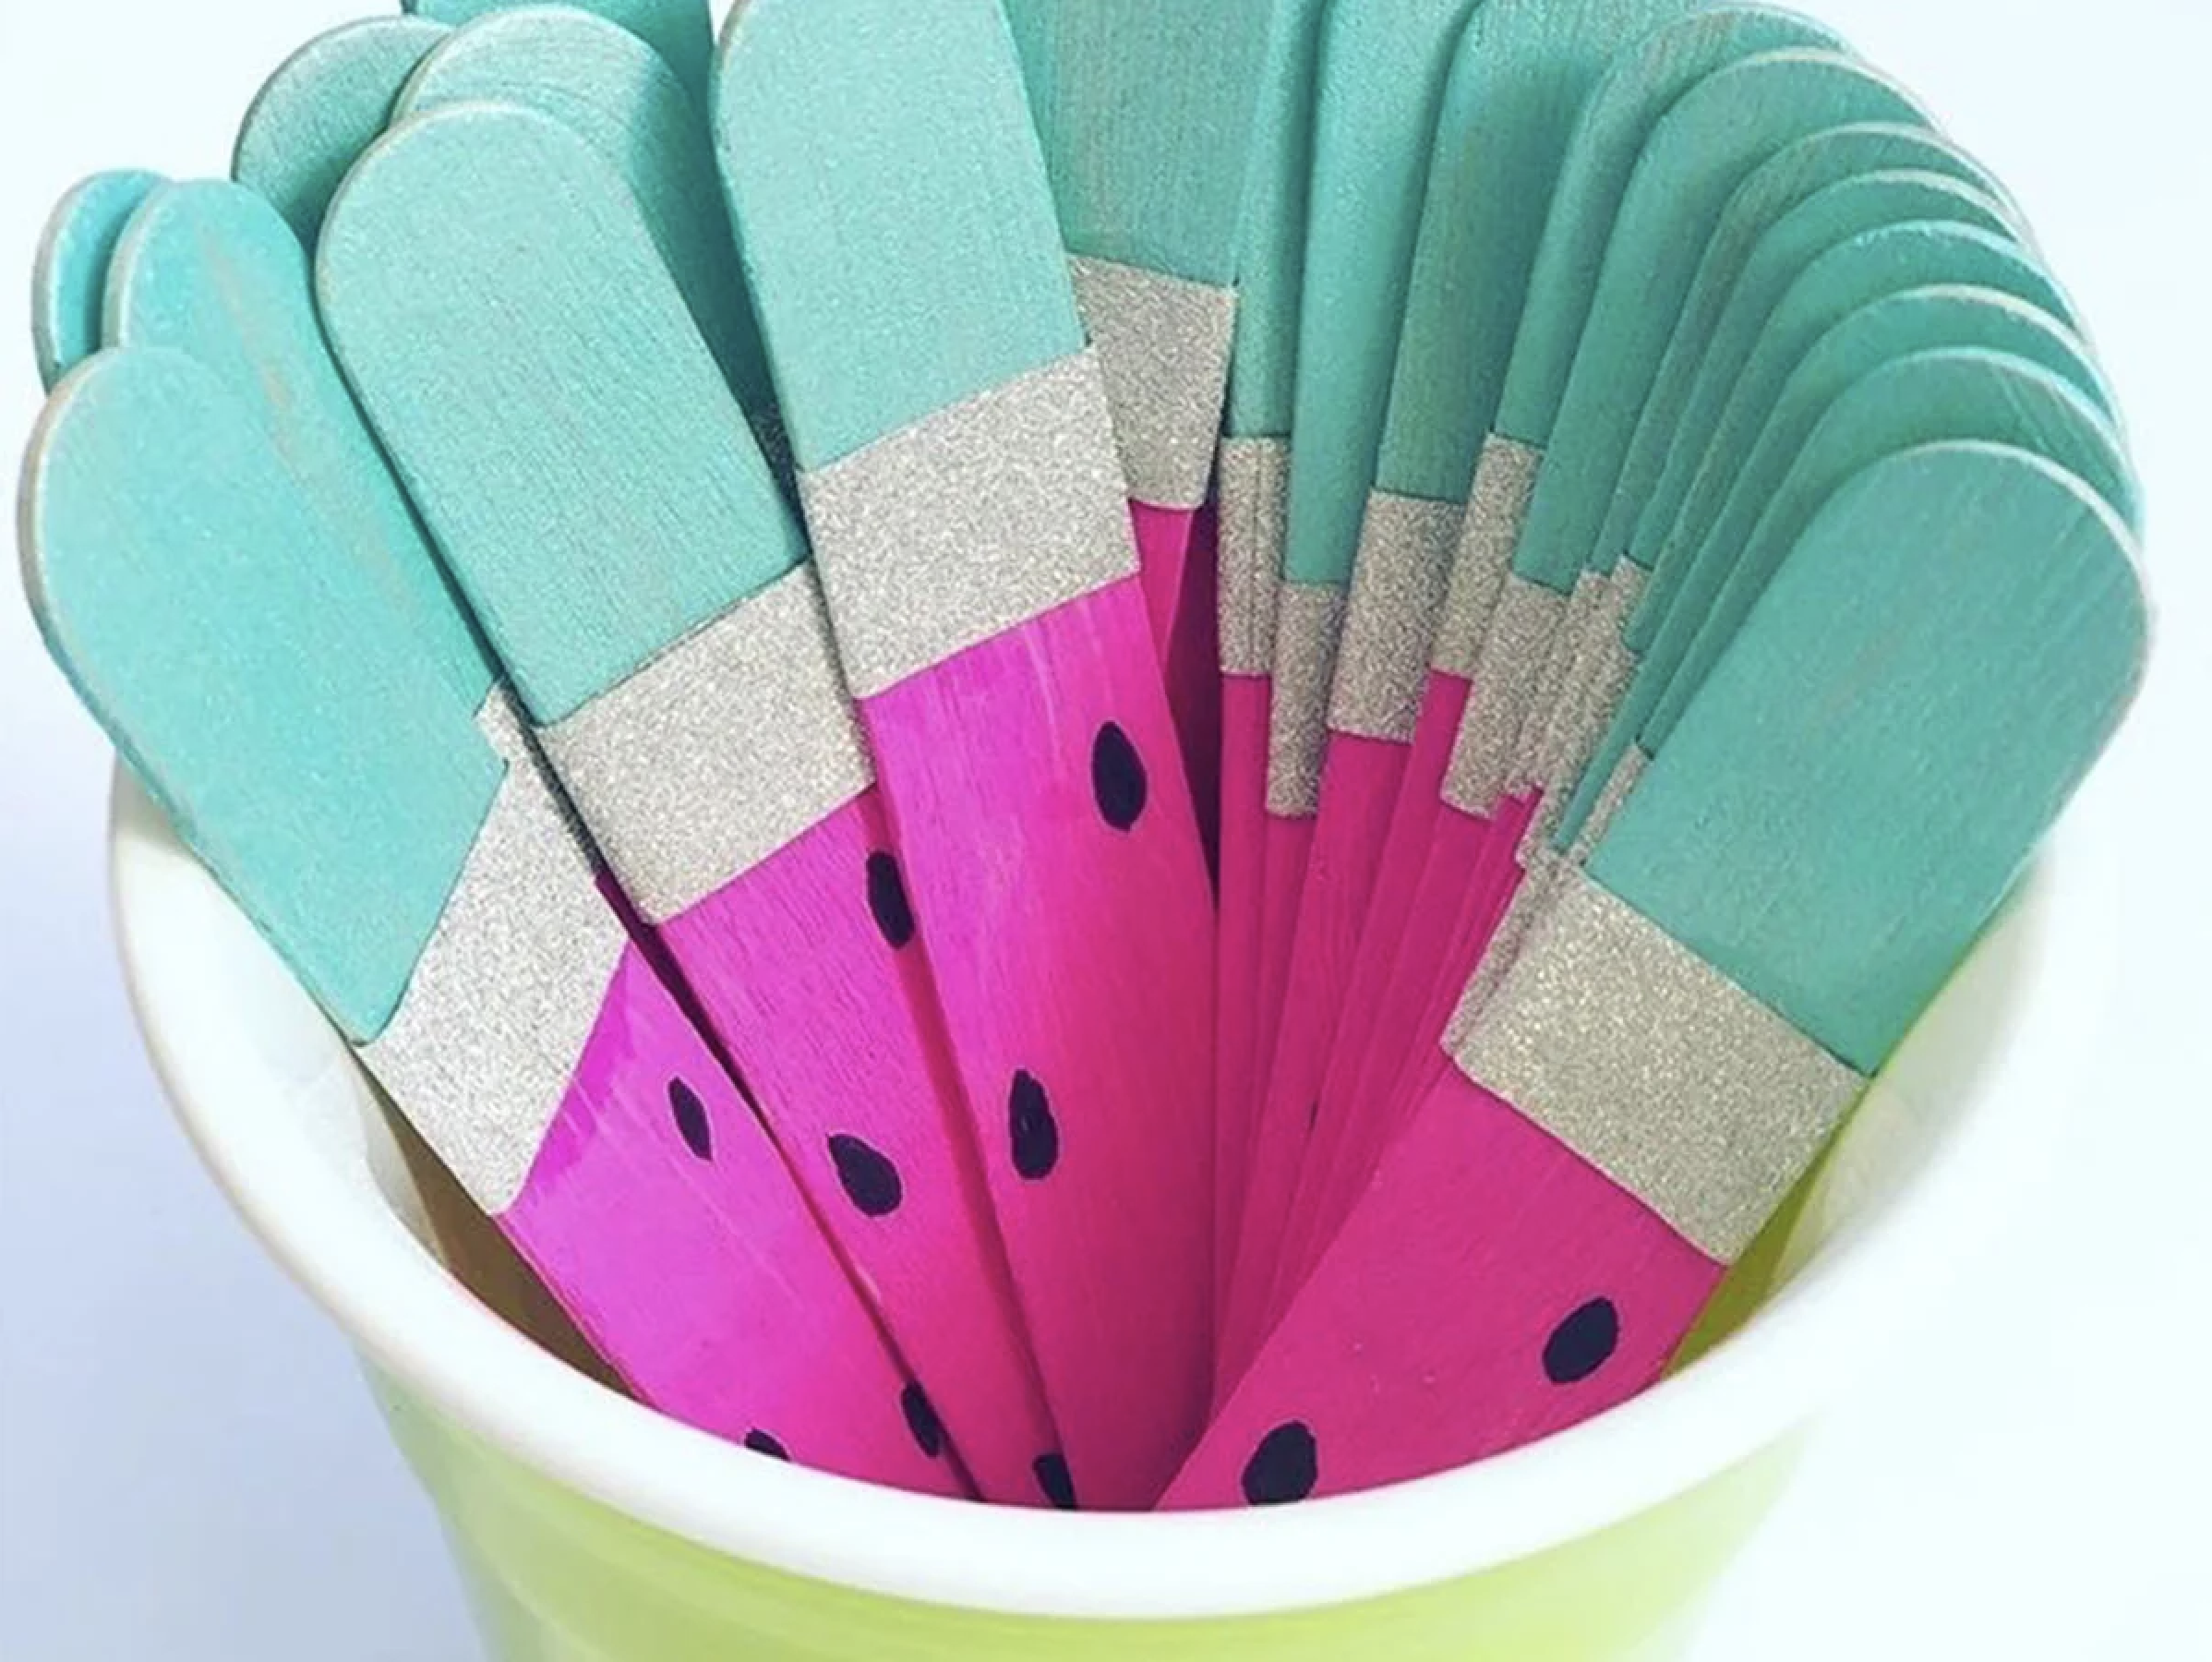 Kmart hacks for teachers: Wooden popsicle sticks with a watermelon print painted on them